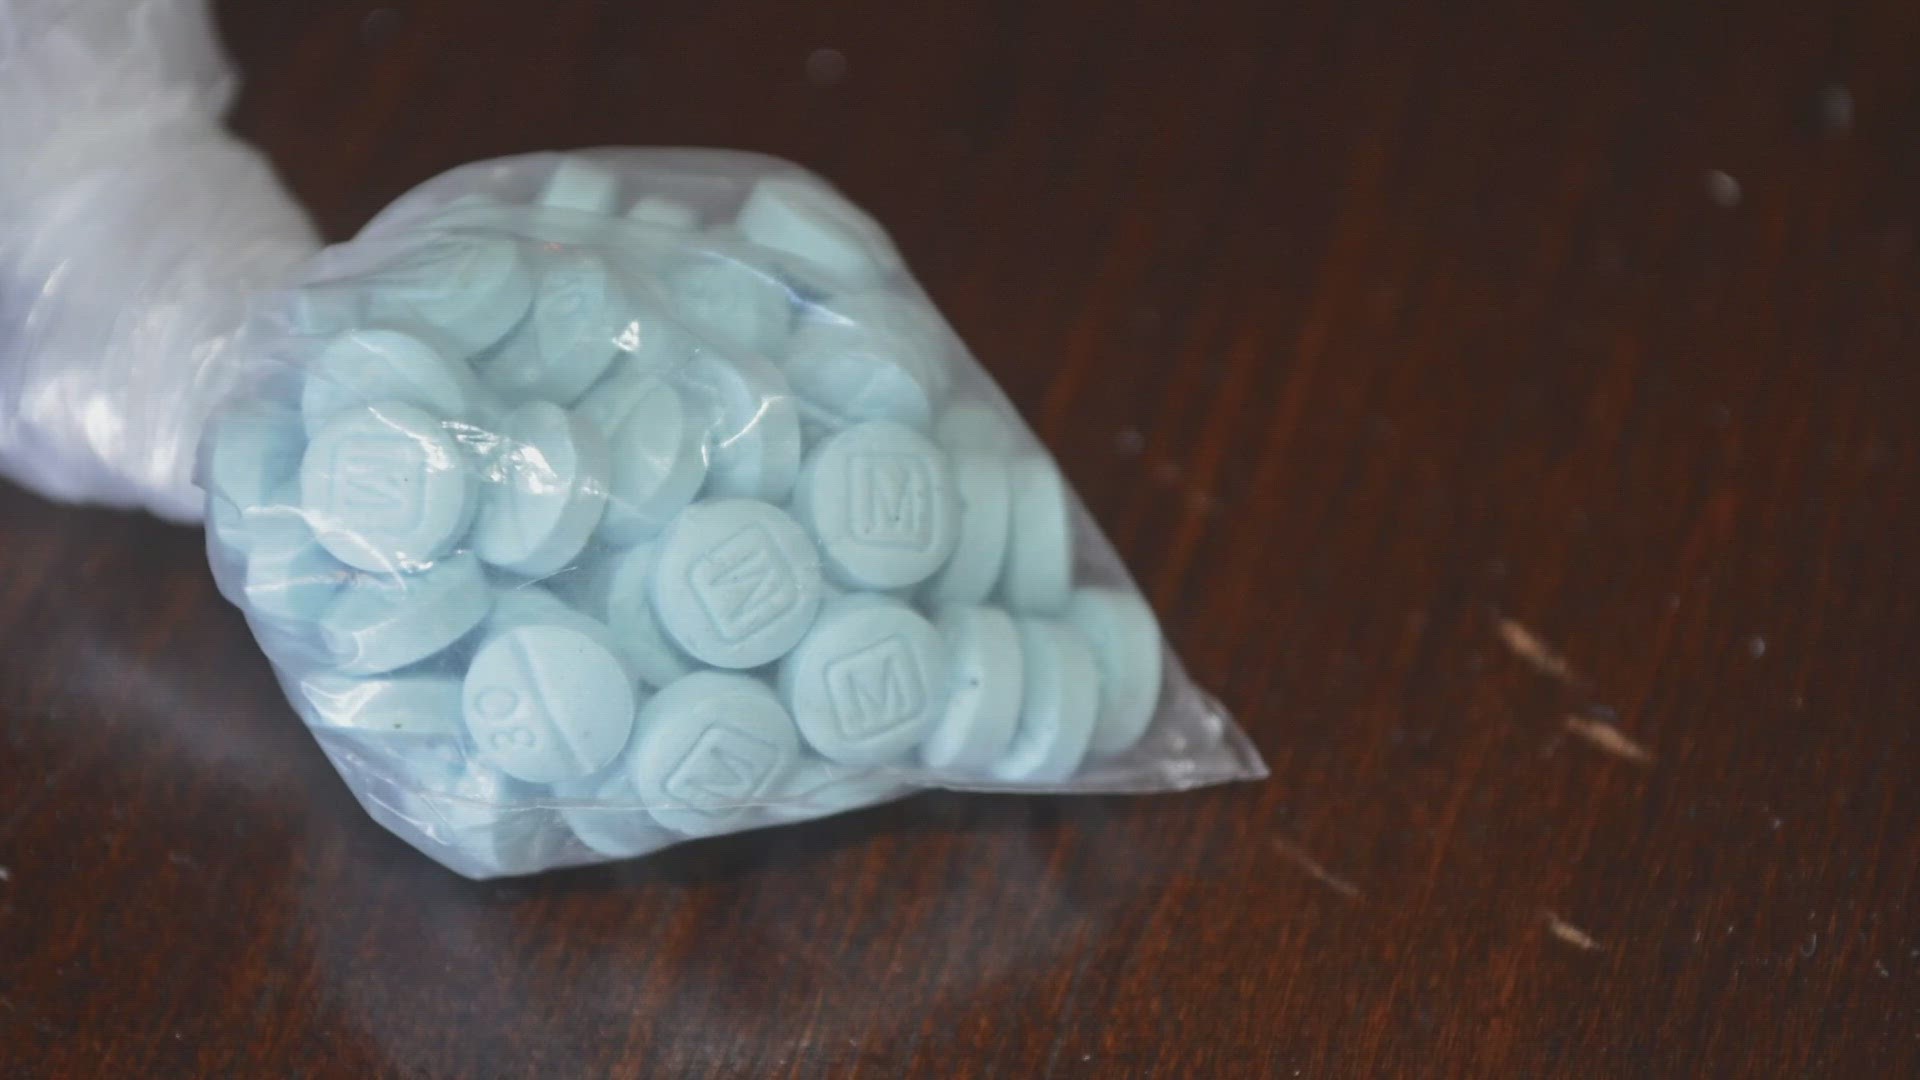 Tuesday marks the second Fentanyl Awareness Day, and local officials hope policy and education will help fight back.